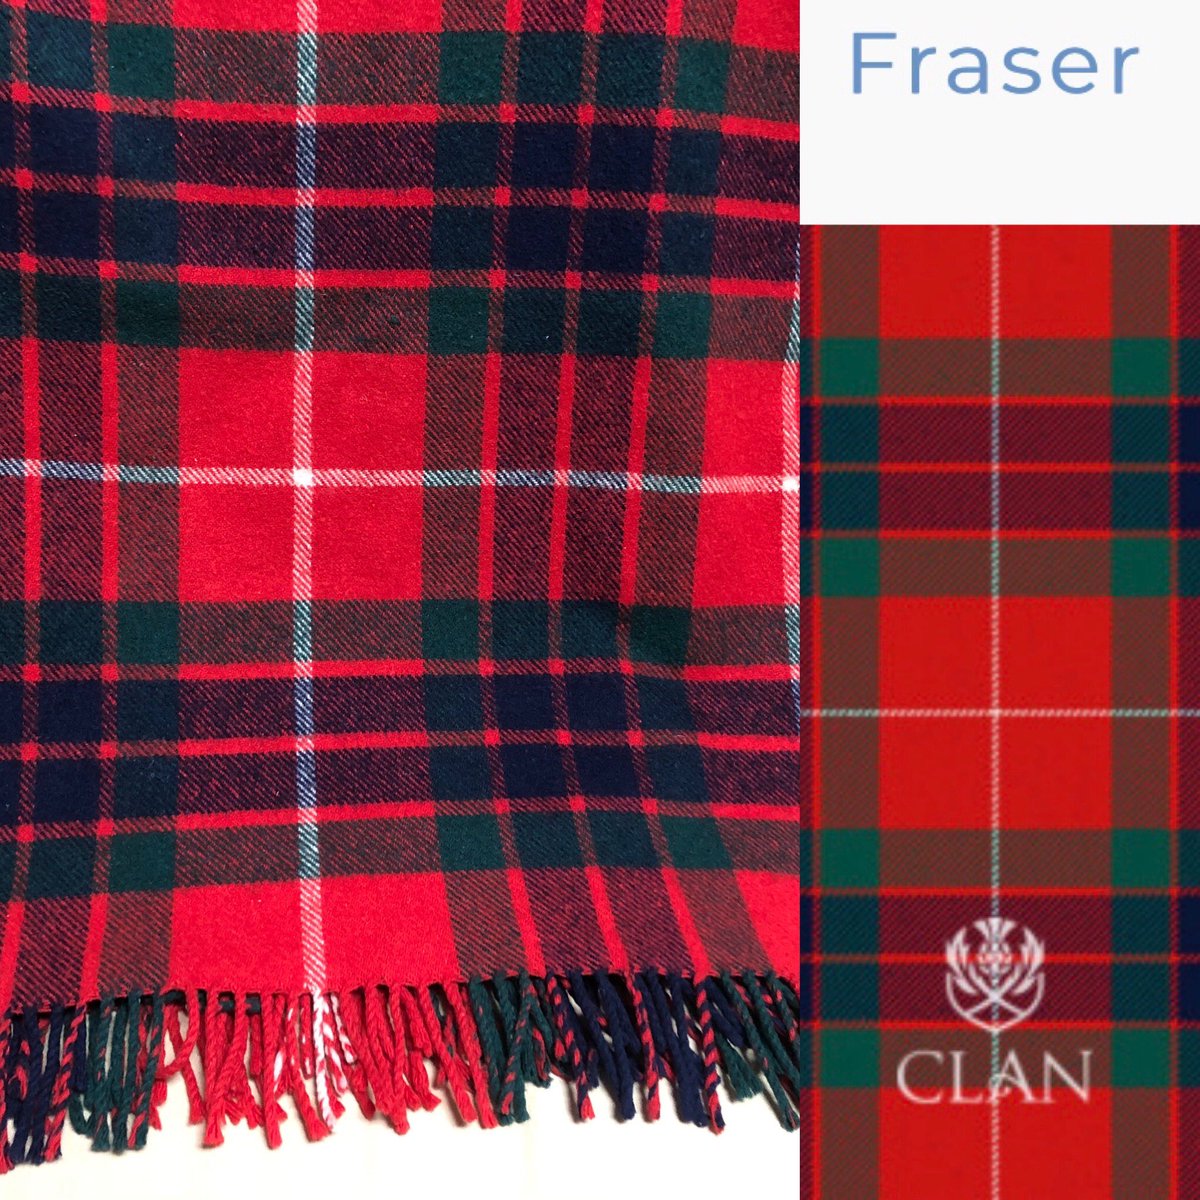 Another chapter. Mrs Laird Fraser & I were given a Hudson’s Bay wool blanket during our engagement LONG ago....She found the tartan on the ‘net today.....yes, Fraser of Lovat hunting plaid. Whaaat?!? She views it as a @Writer_DG  easter egg, finally revealed.🧩🏴󠁧󠁢󠁳󠁣󠁴󠁿🗡 #FraserofLovat